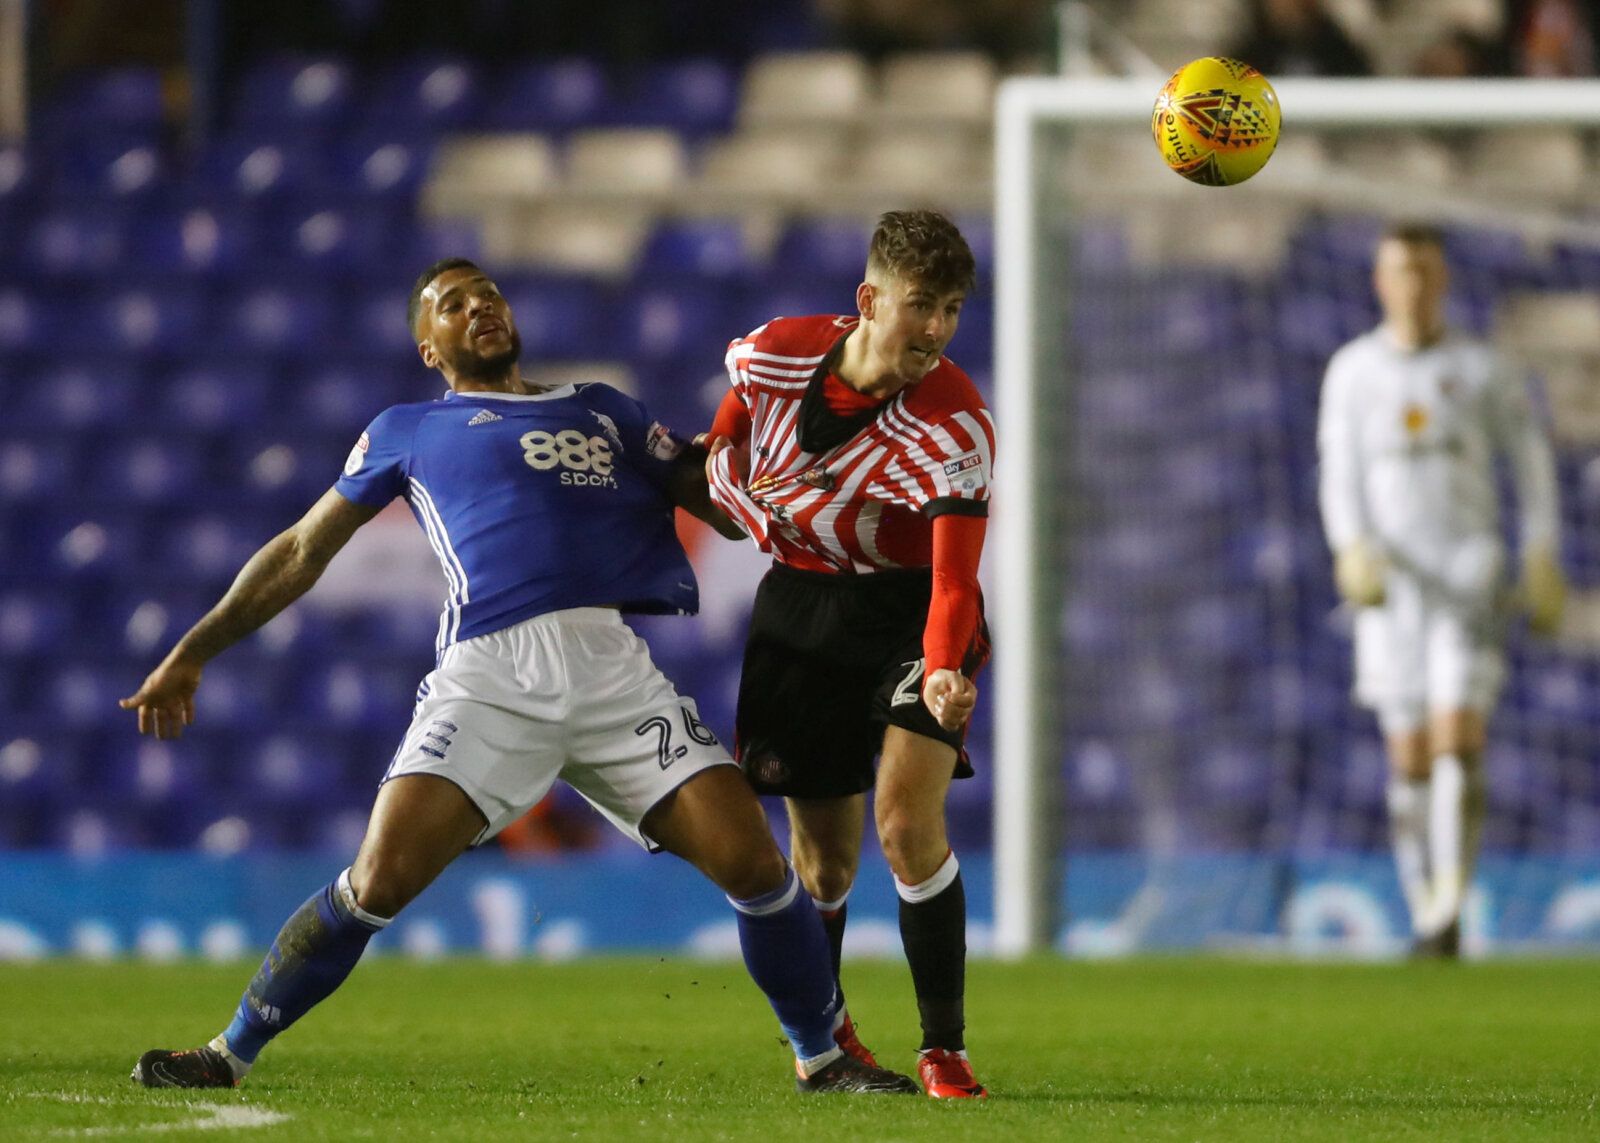 Soccer Football - Championship - Birmingham City vs Sunderland - St Andrew’s, Birmingham, Britain - January 30, 2018   Birmingham's David Davis and Sunderland's Ethan Robson challenge for the ball   Action Images/Paul Childs    EDITORIAL USE ONLY. No use with unauthorized audio, video, data, fixture lists, club/league logos or 